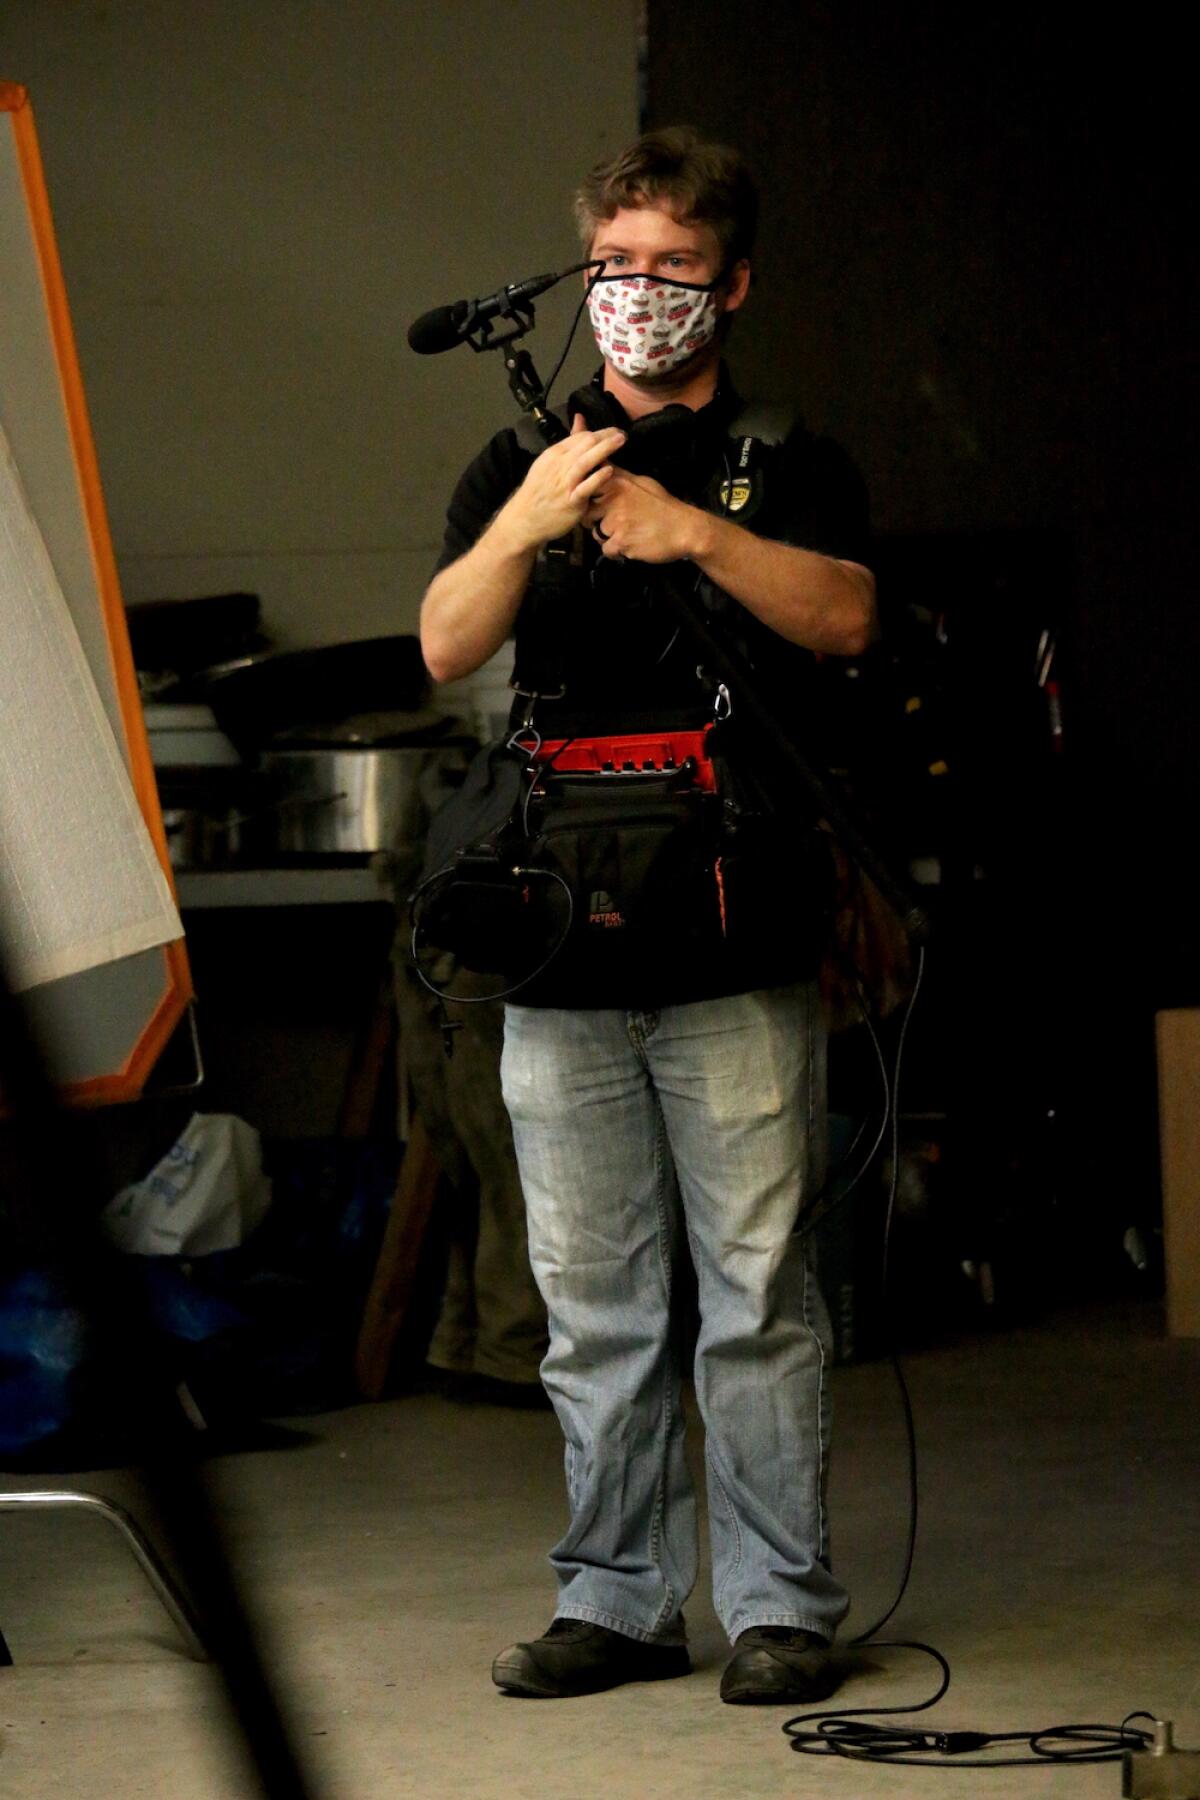 La Jollan John Menvielle on the set of "Touch," for which he is nominated for a San Diego Film Award for visual effects.